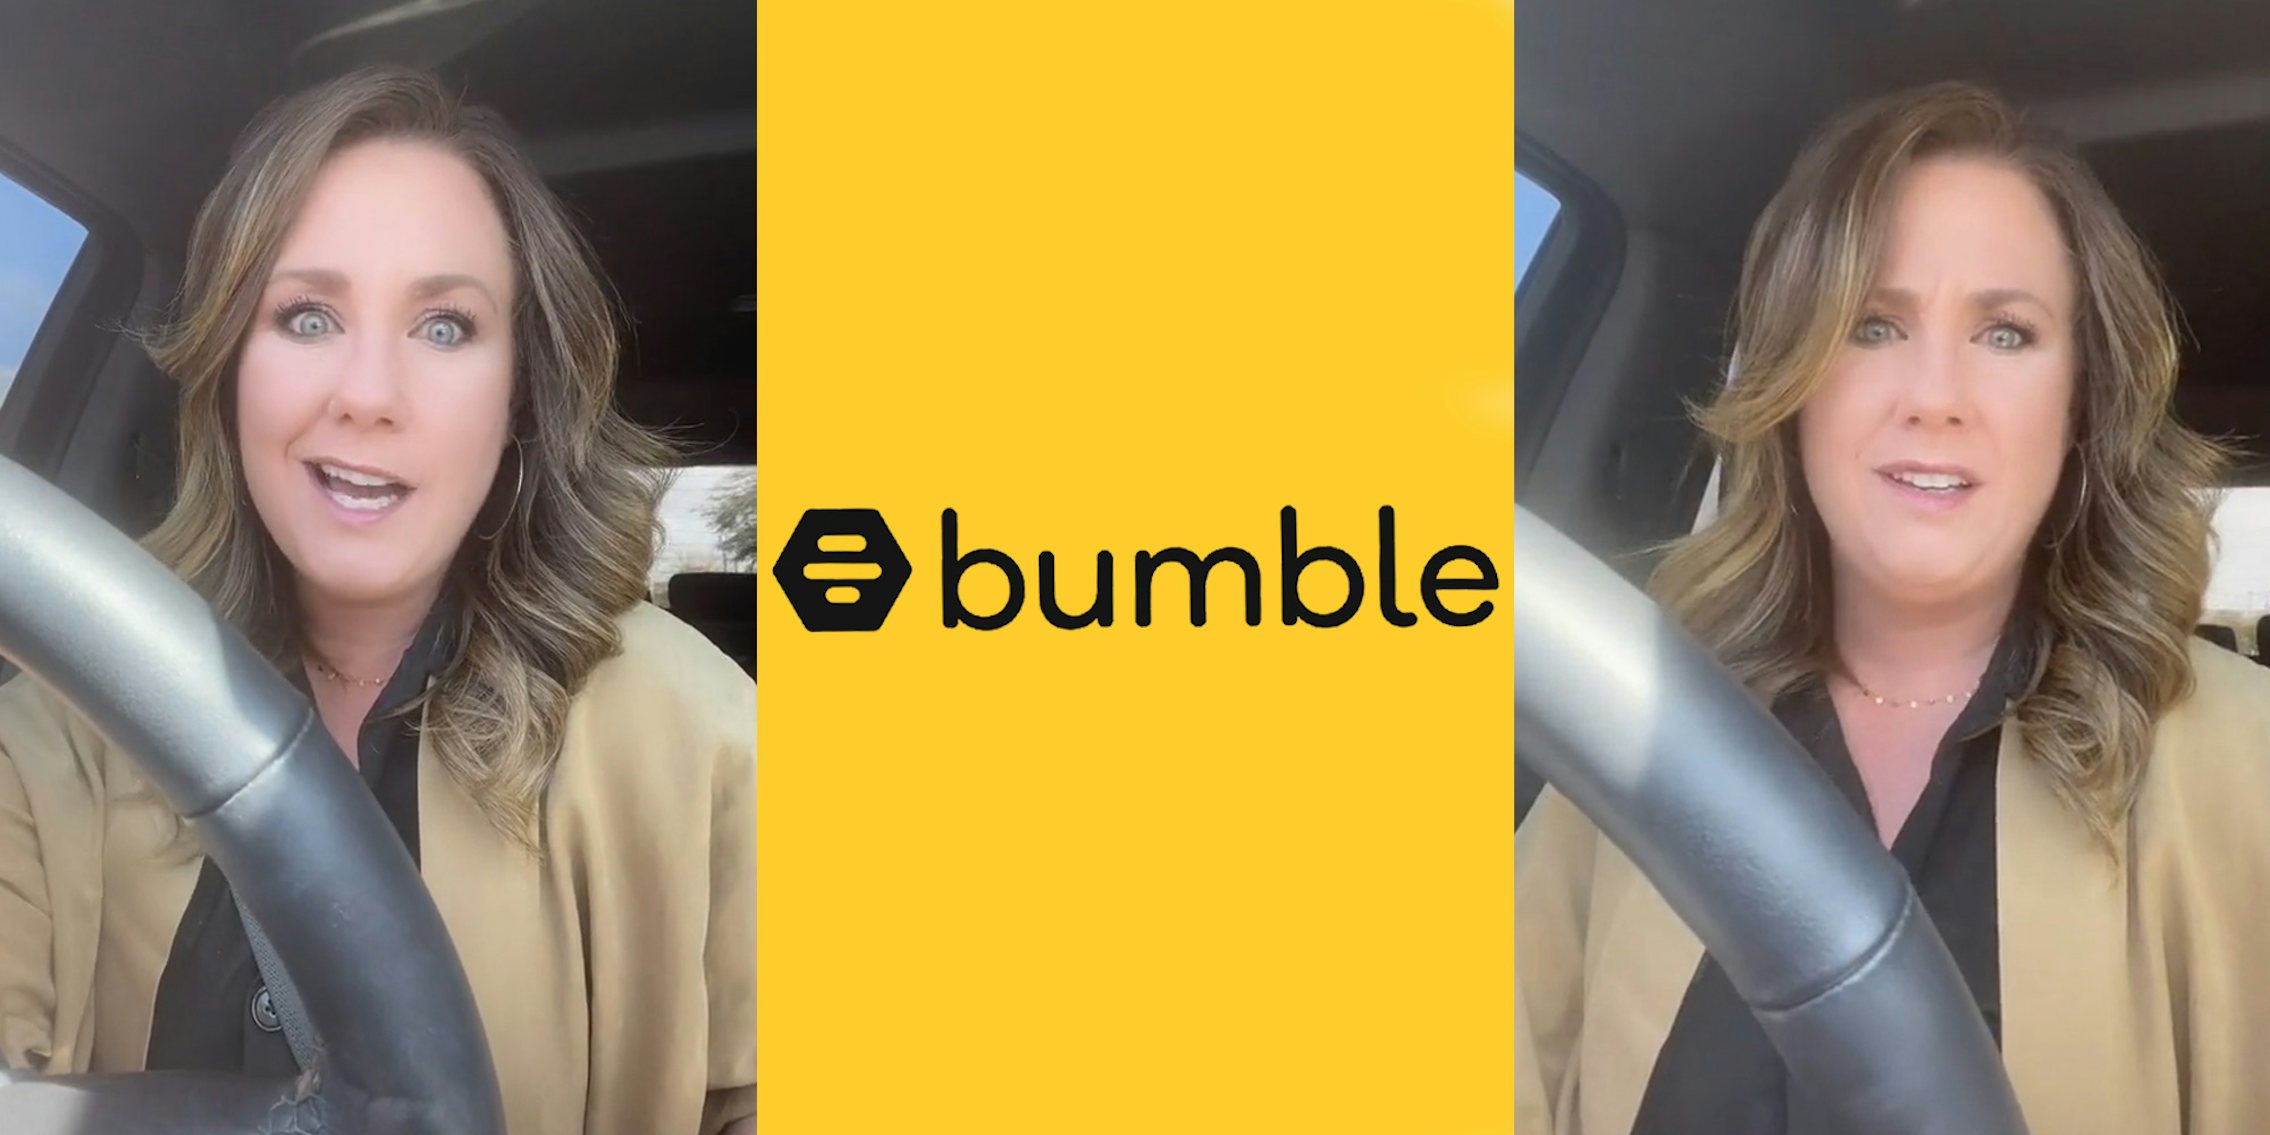 woman speaking in car (l) Bumble logo on yellow background (c) woman speaking in car (r)